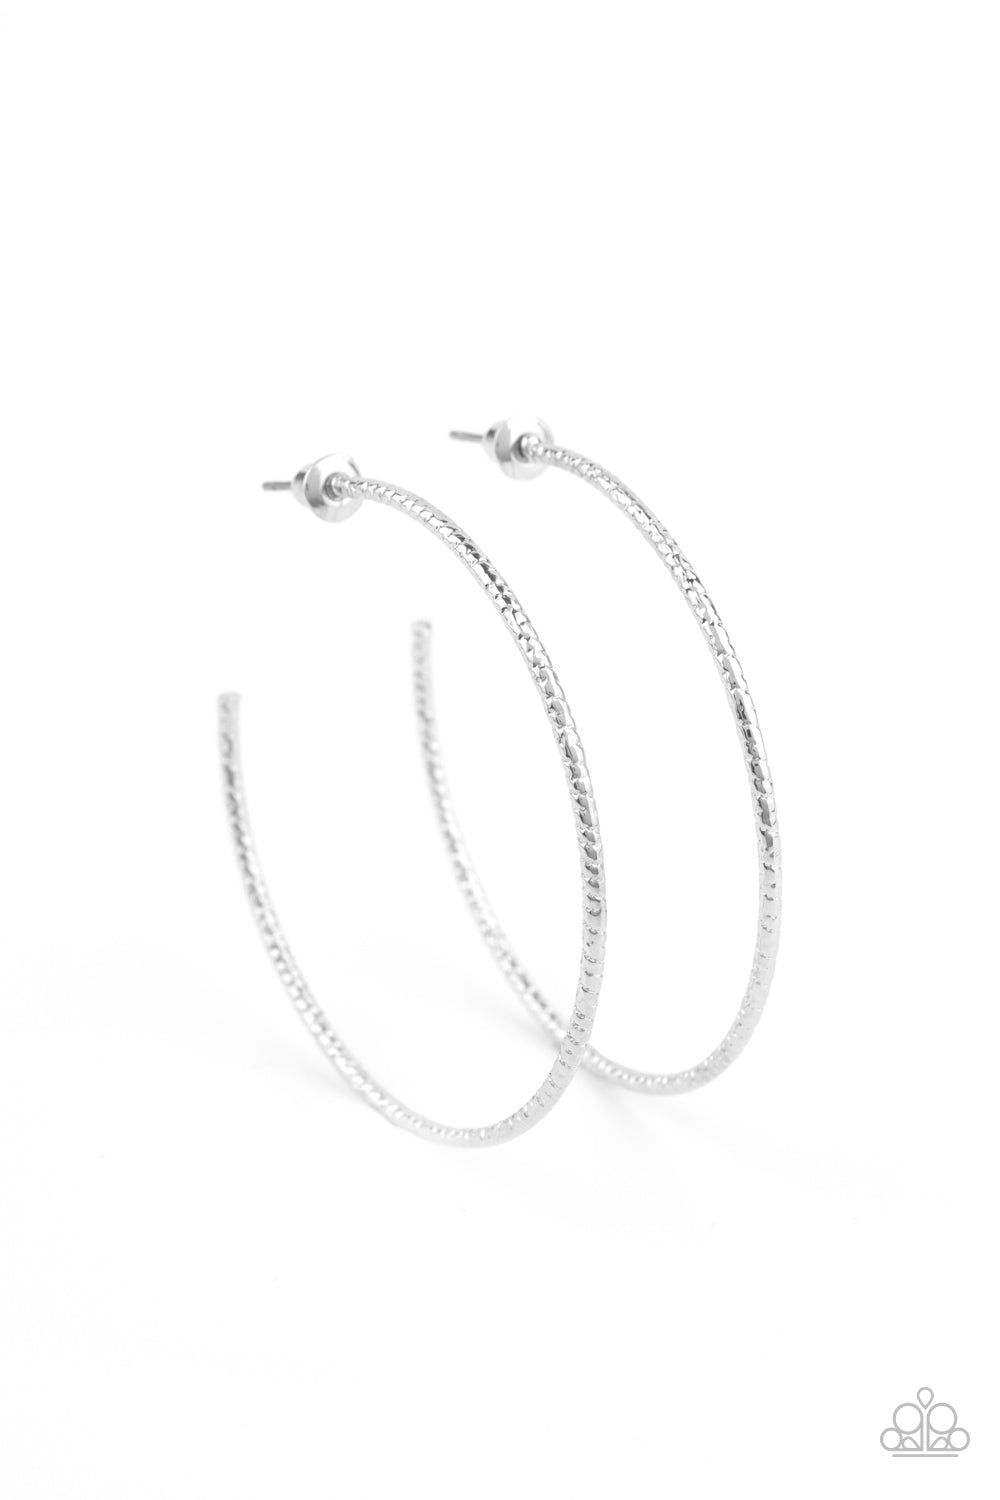 Inclined To Entwine - Silver Hoop Paparazzi Earrings